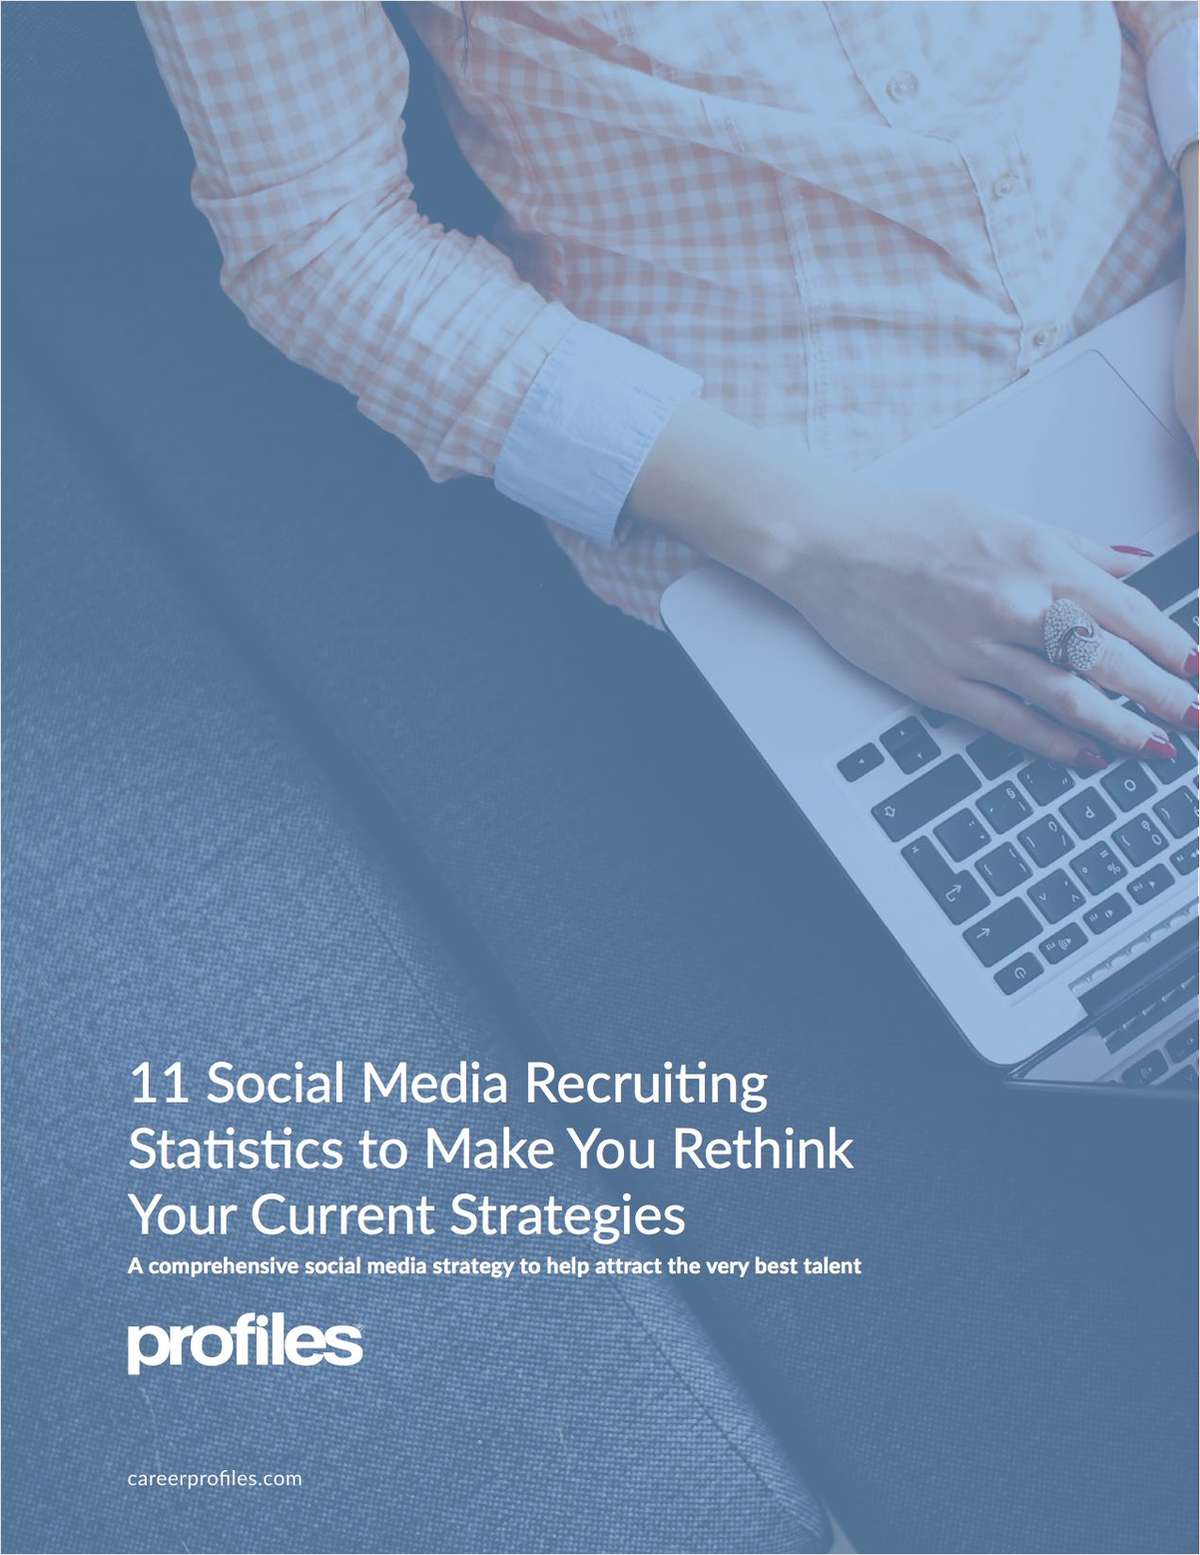 11 Social Media Recruiting Statistics to Make You Rethink Your Current Strategies